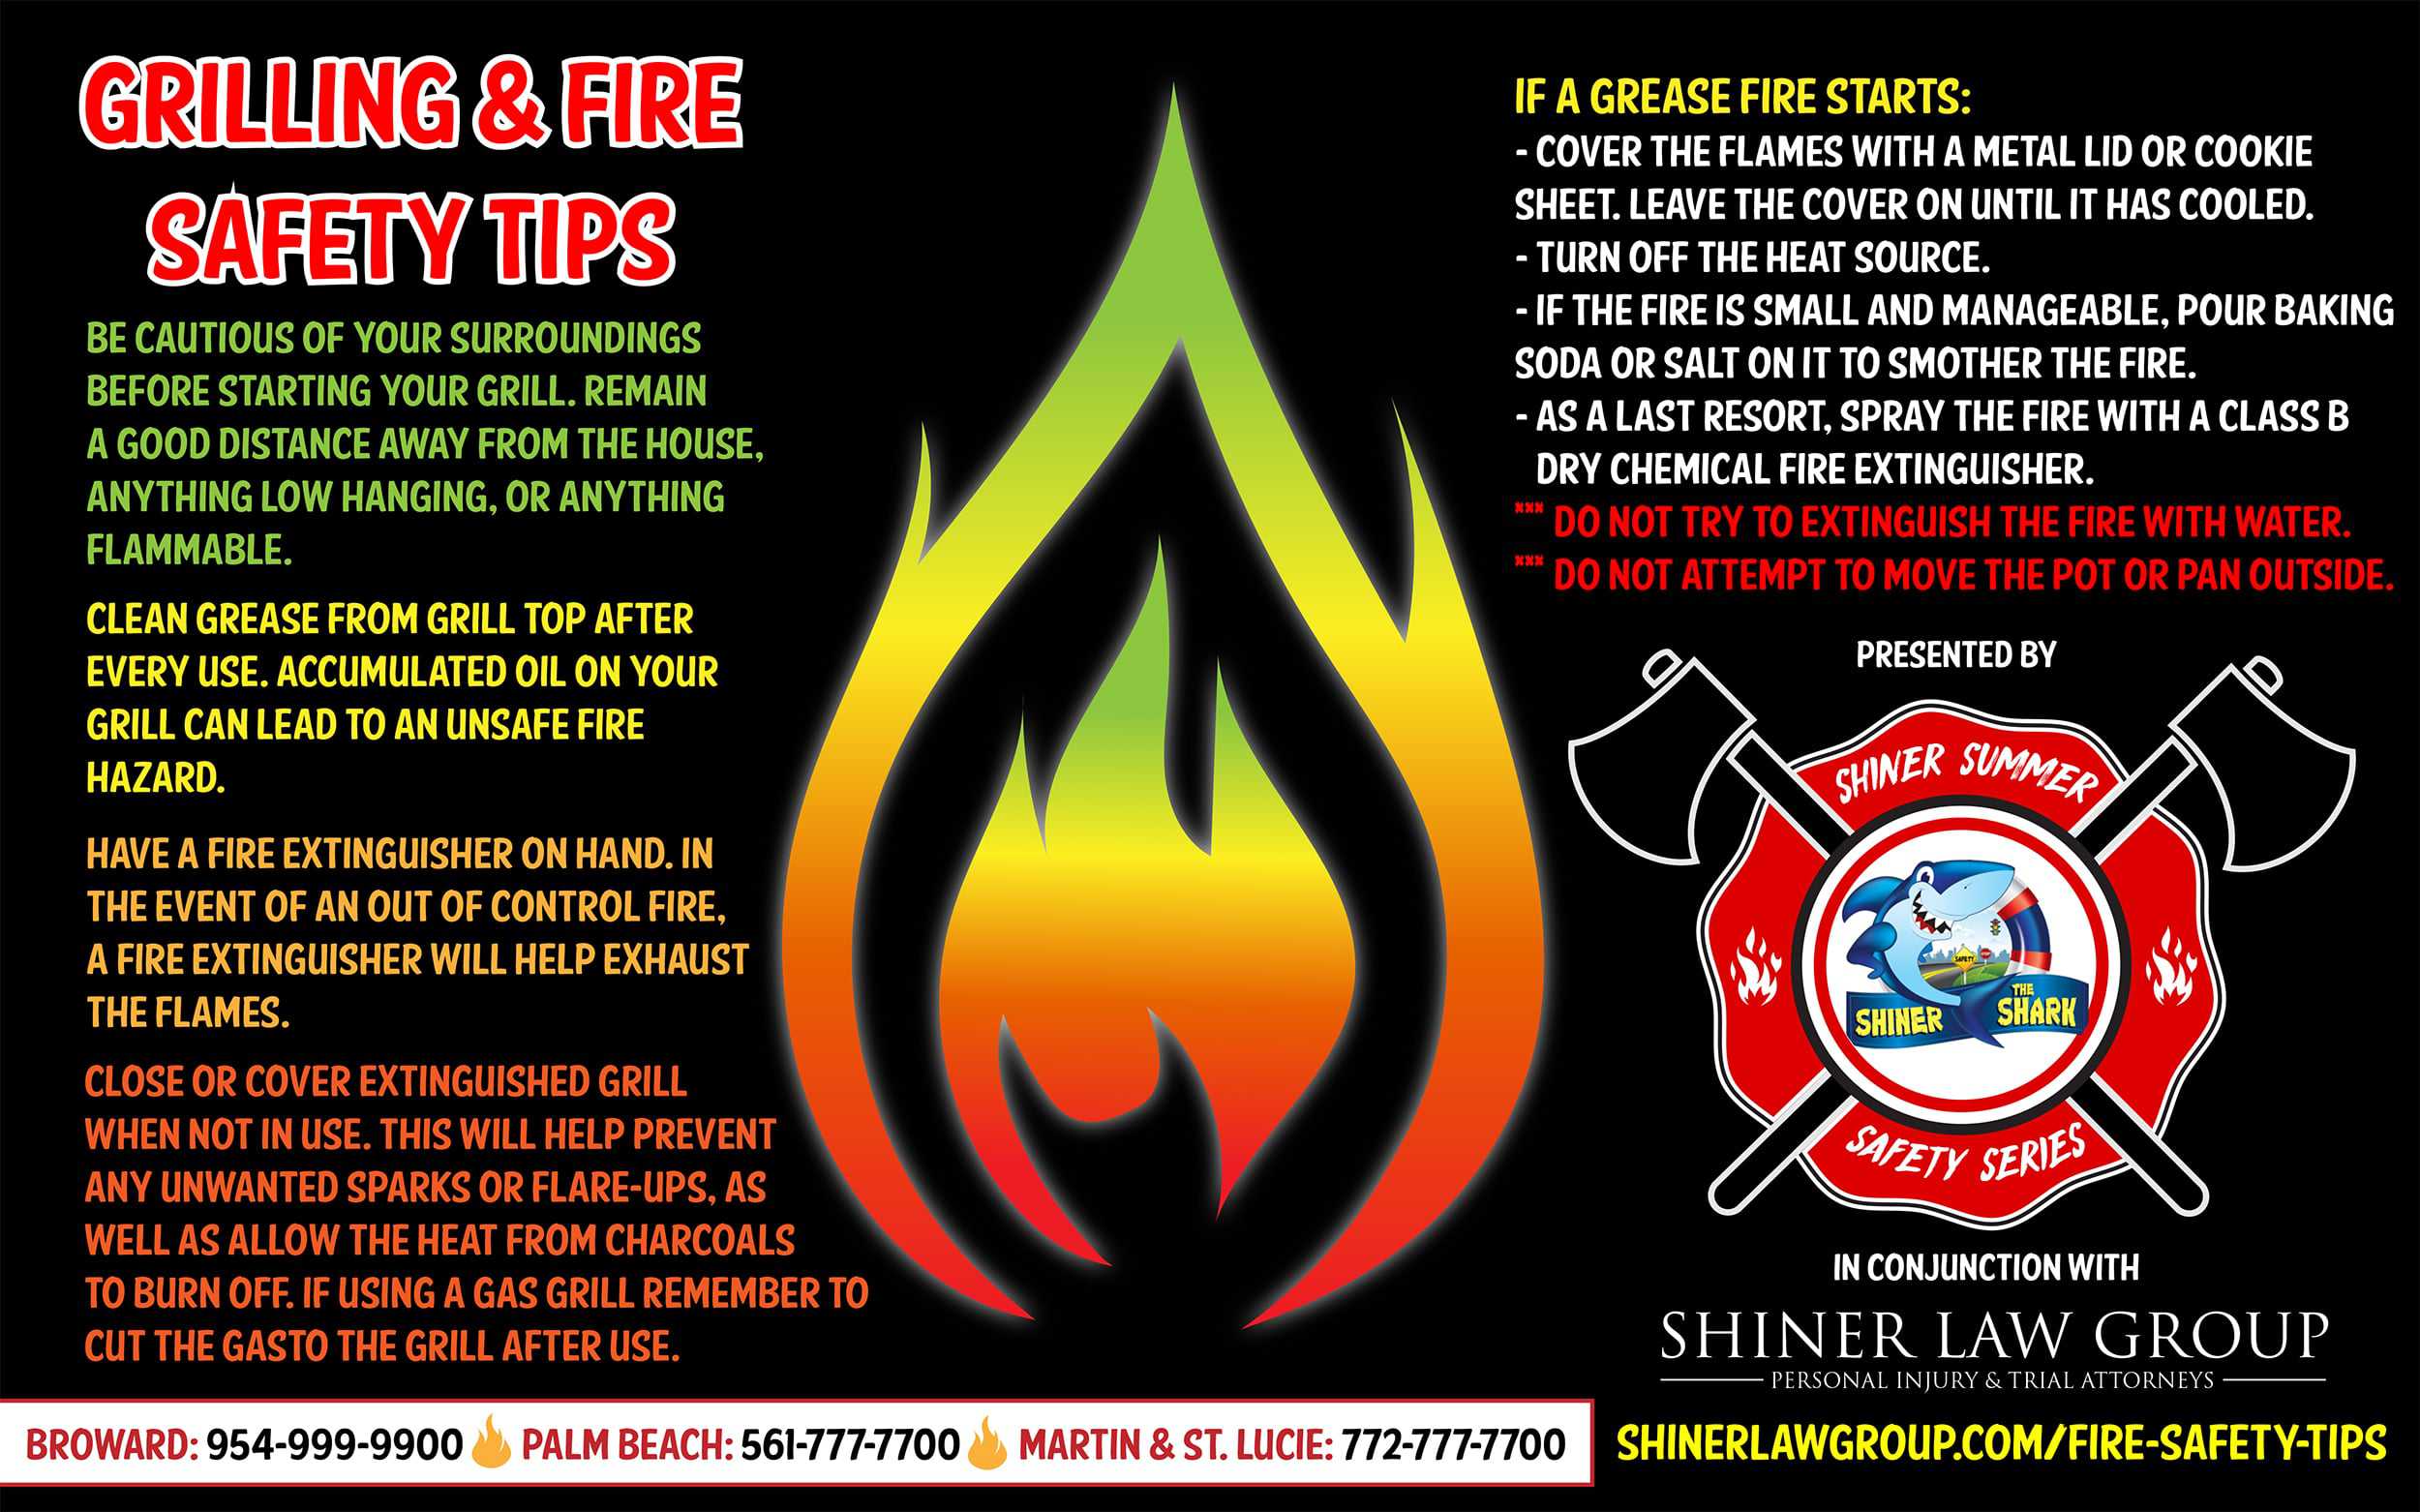 Fire Safety Tips - Summer Safety Series